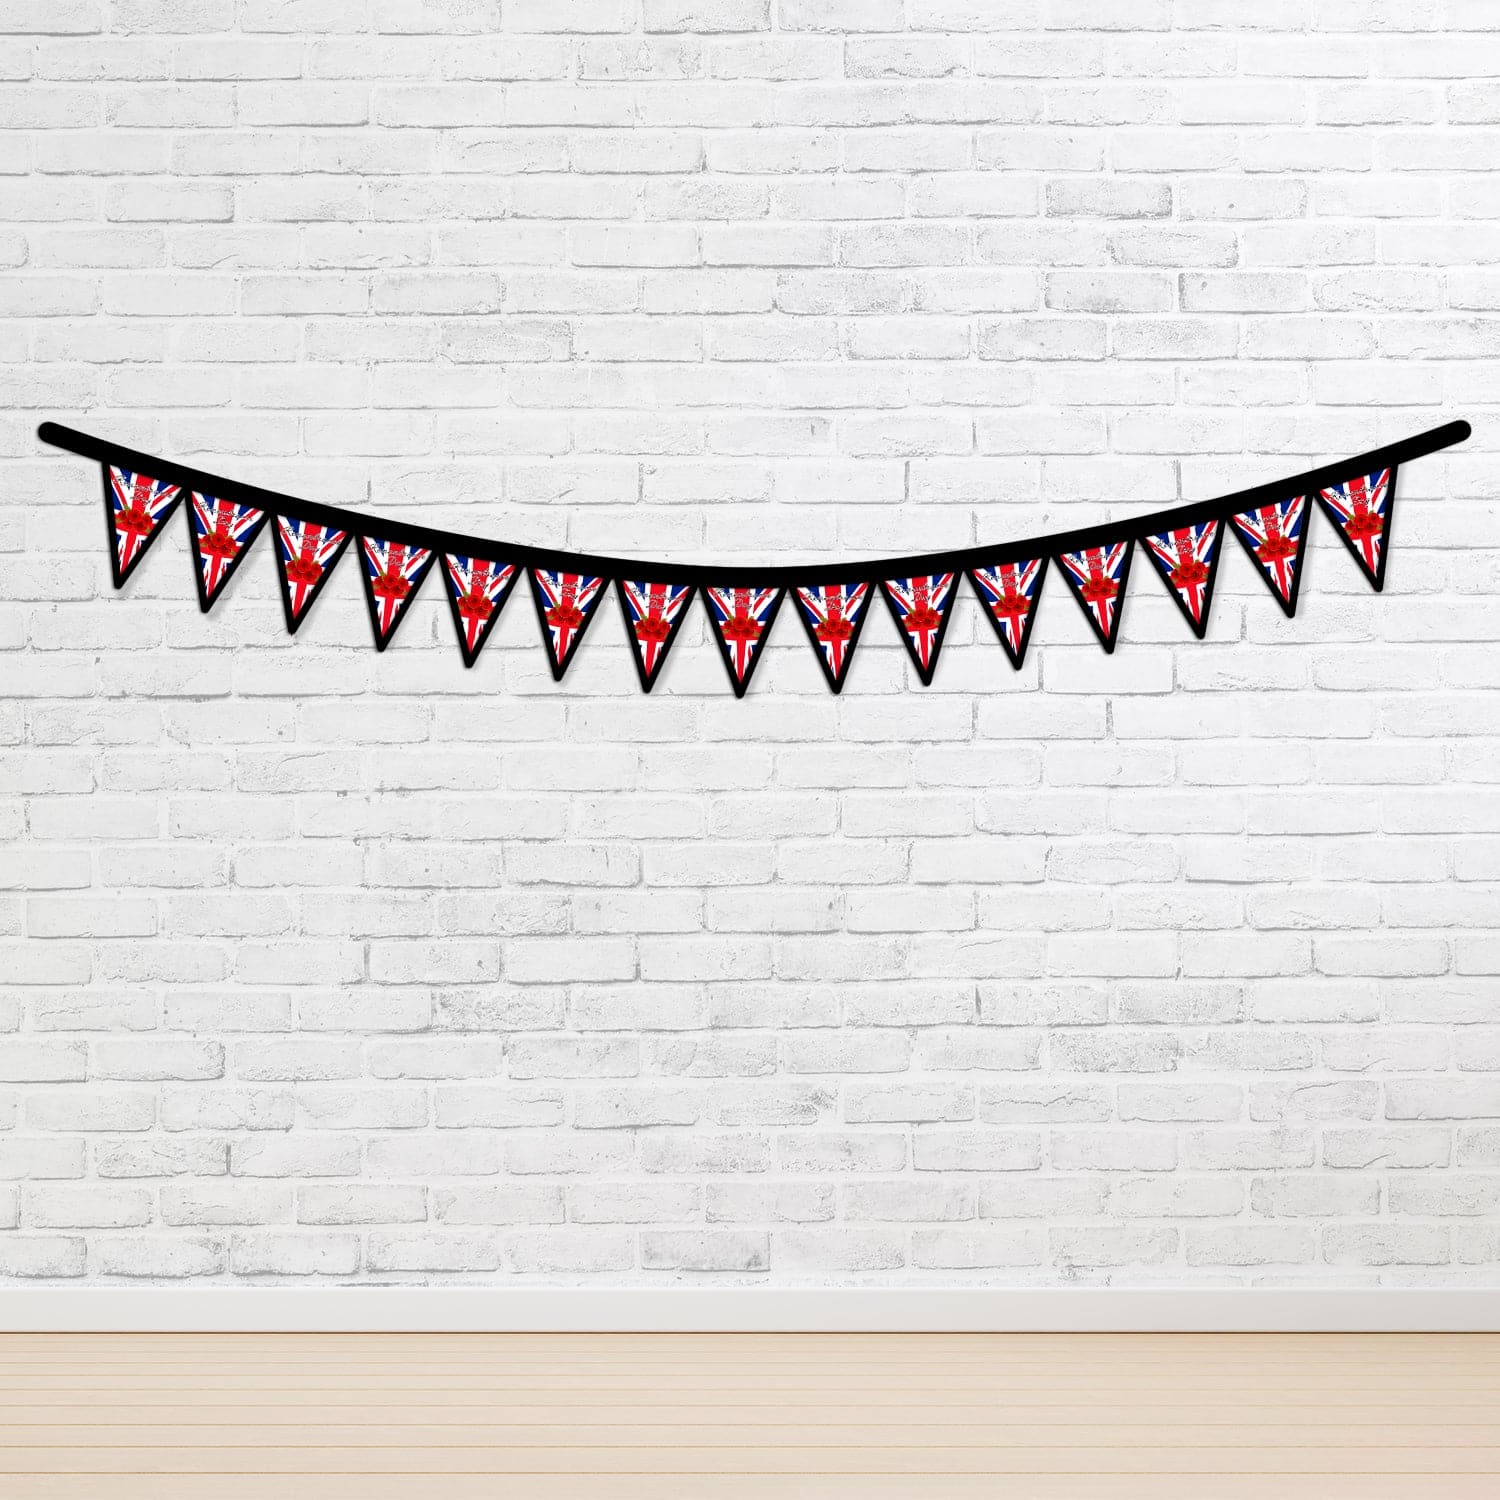 Remembrance Day - Poppy Flag - 3m Fabric Bunting 